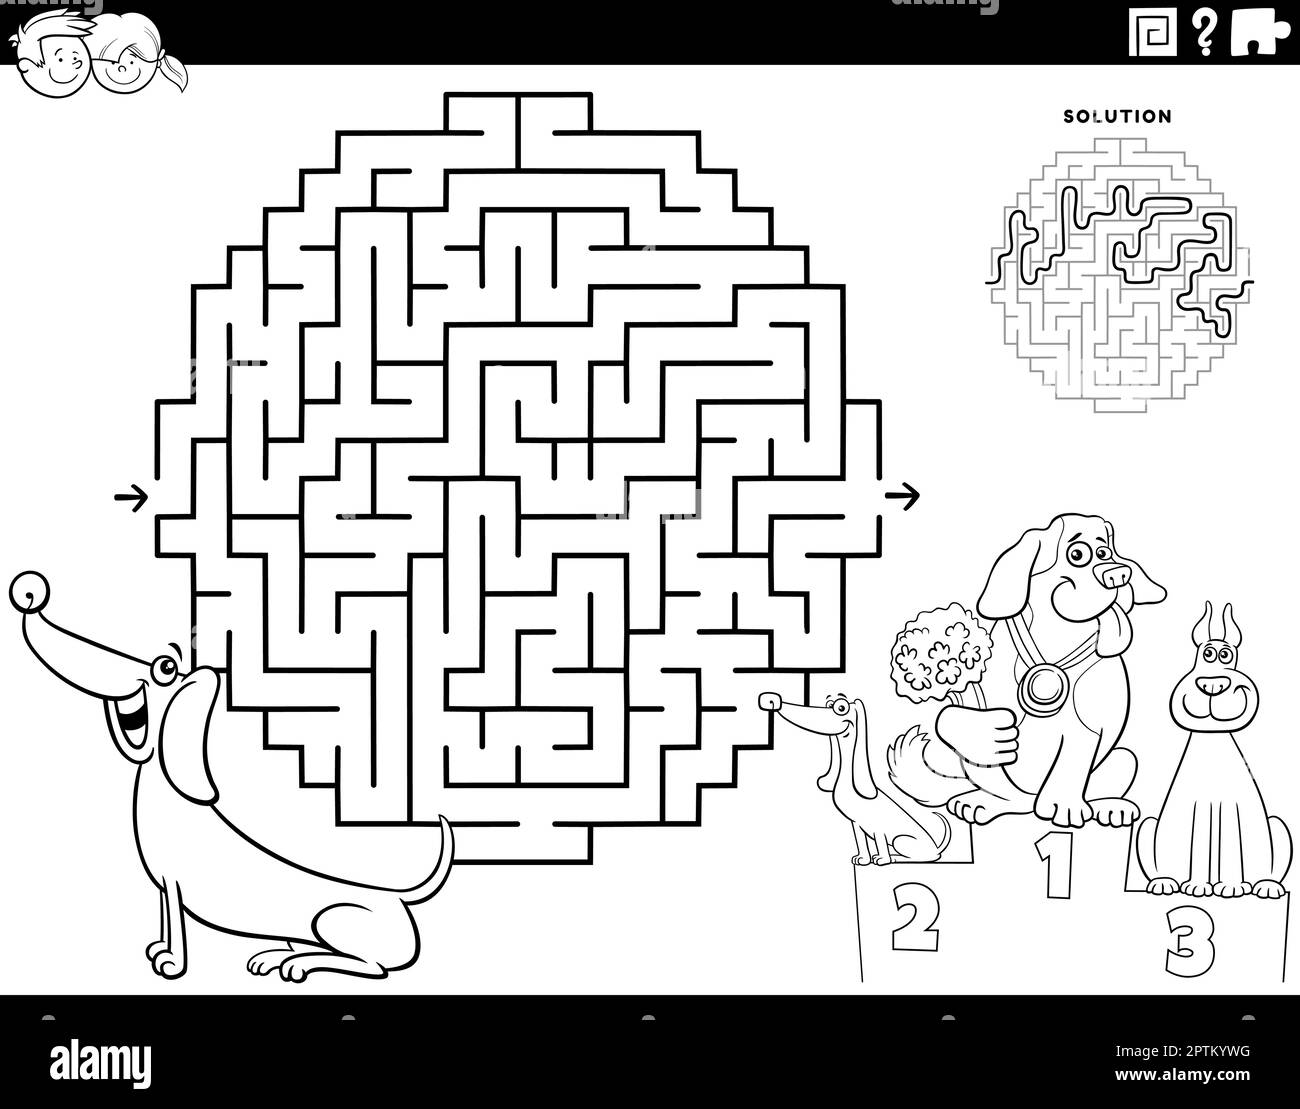 https://c8.alamy.com/comp/2PTKYWG/maze-with-dachshund-dog-and-the-dog-show-coloring-page-2PTKYWG.jpg